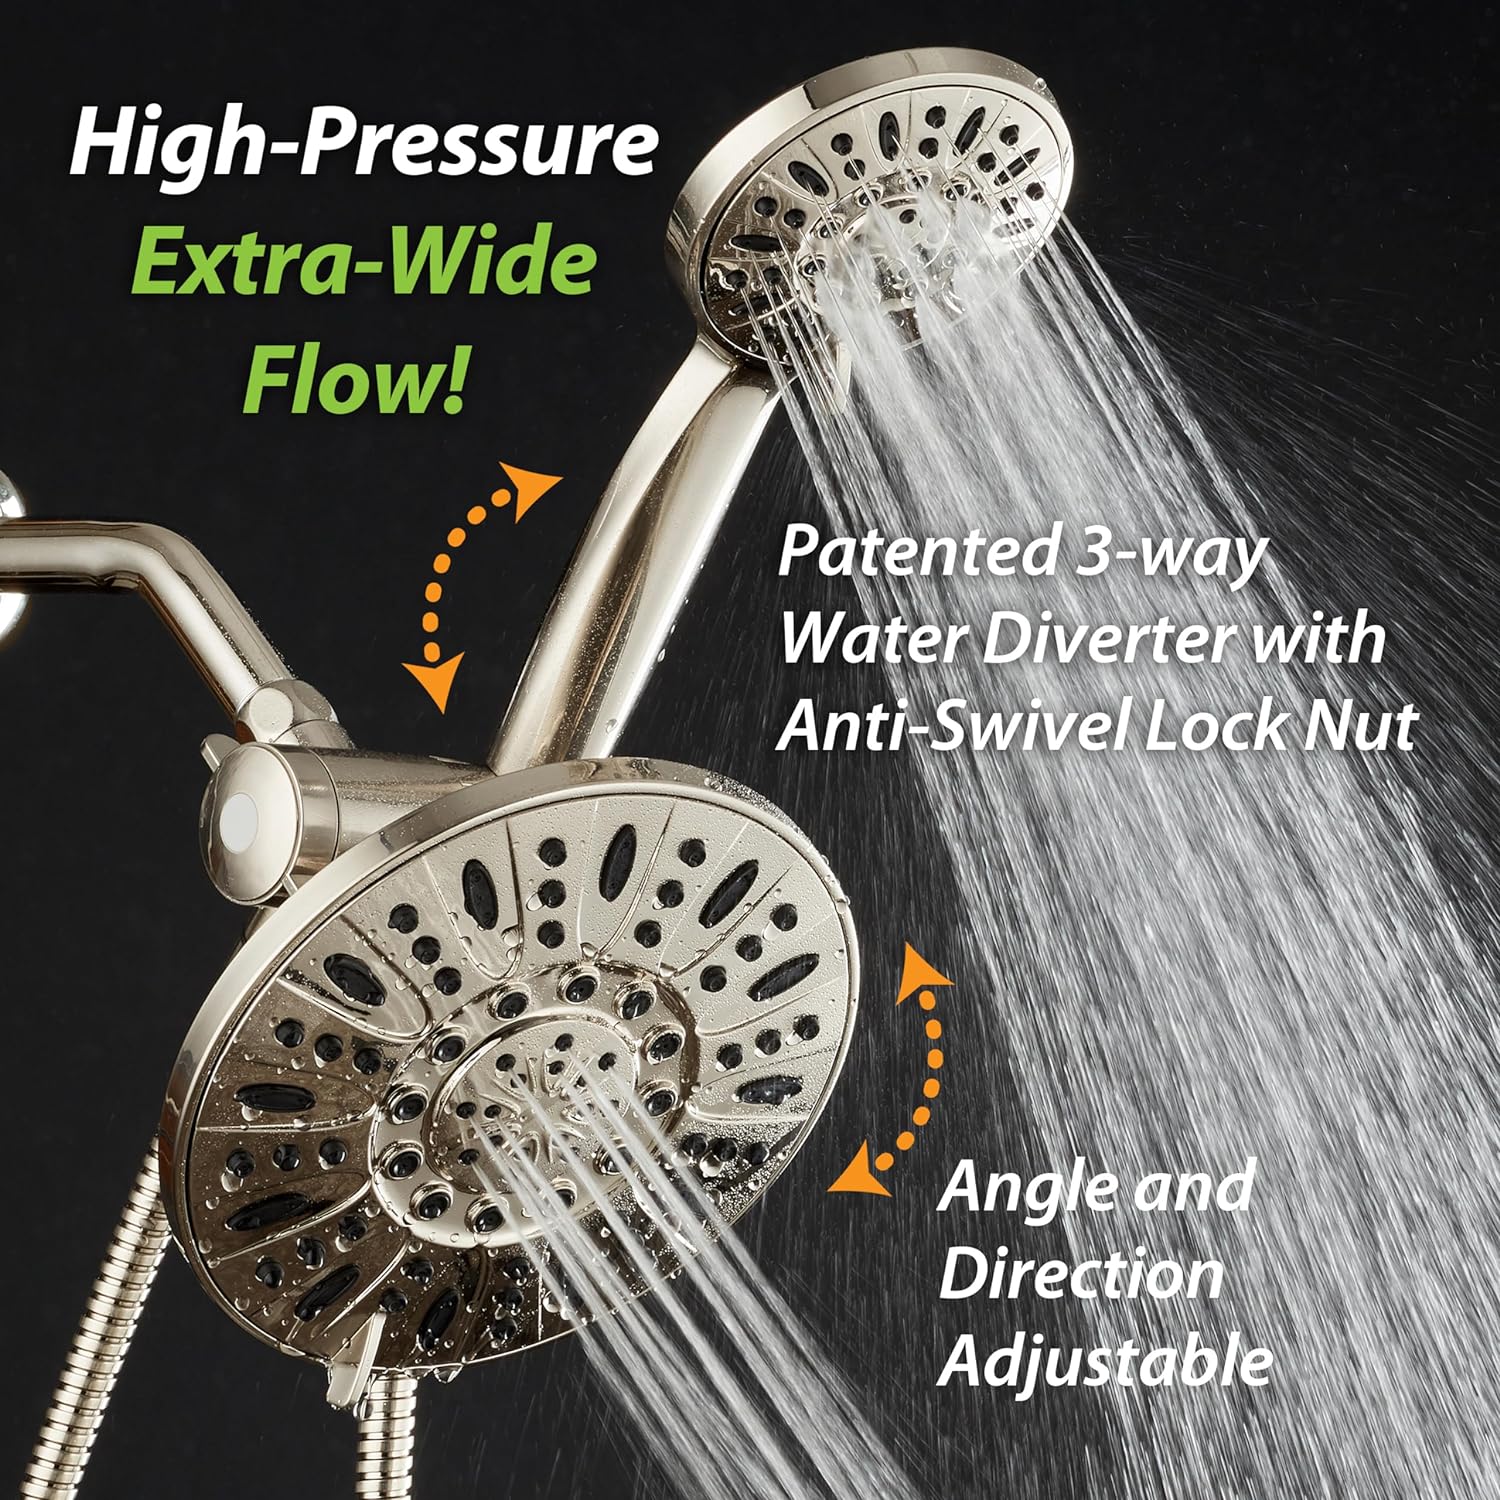 AquaDance 7 Premium High Pressure 3-Way Rainfall Combo with Stainless Steel Hose – Enjoy Luxurious 6-setting Rain Shower Head and Hand Held Shower Separately or Together – Brushed Nickel Finish